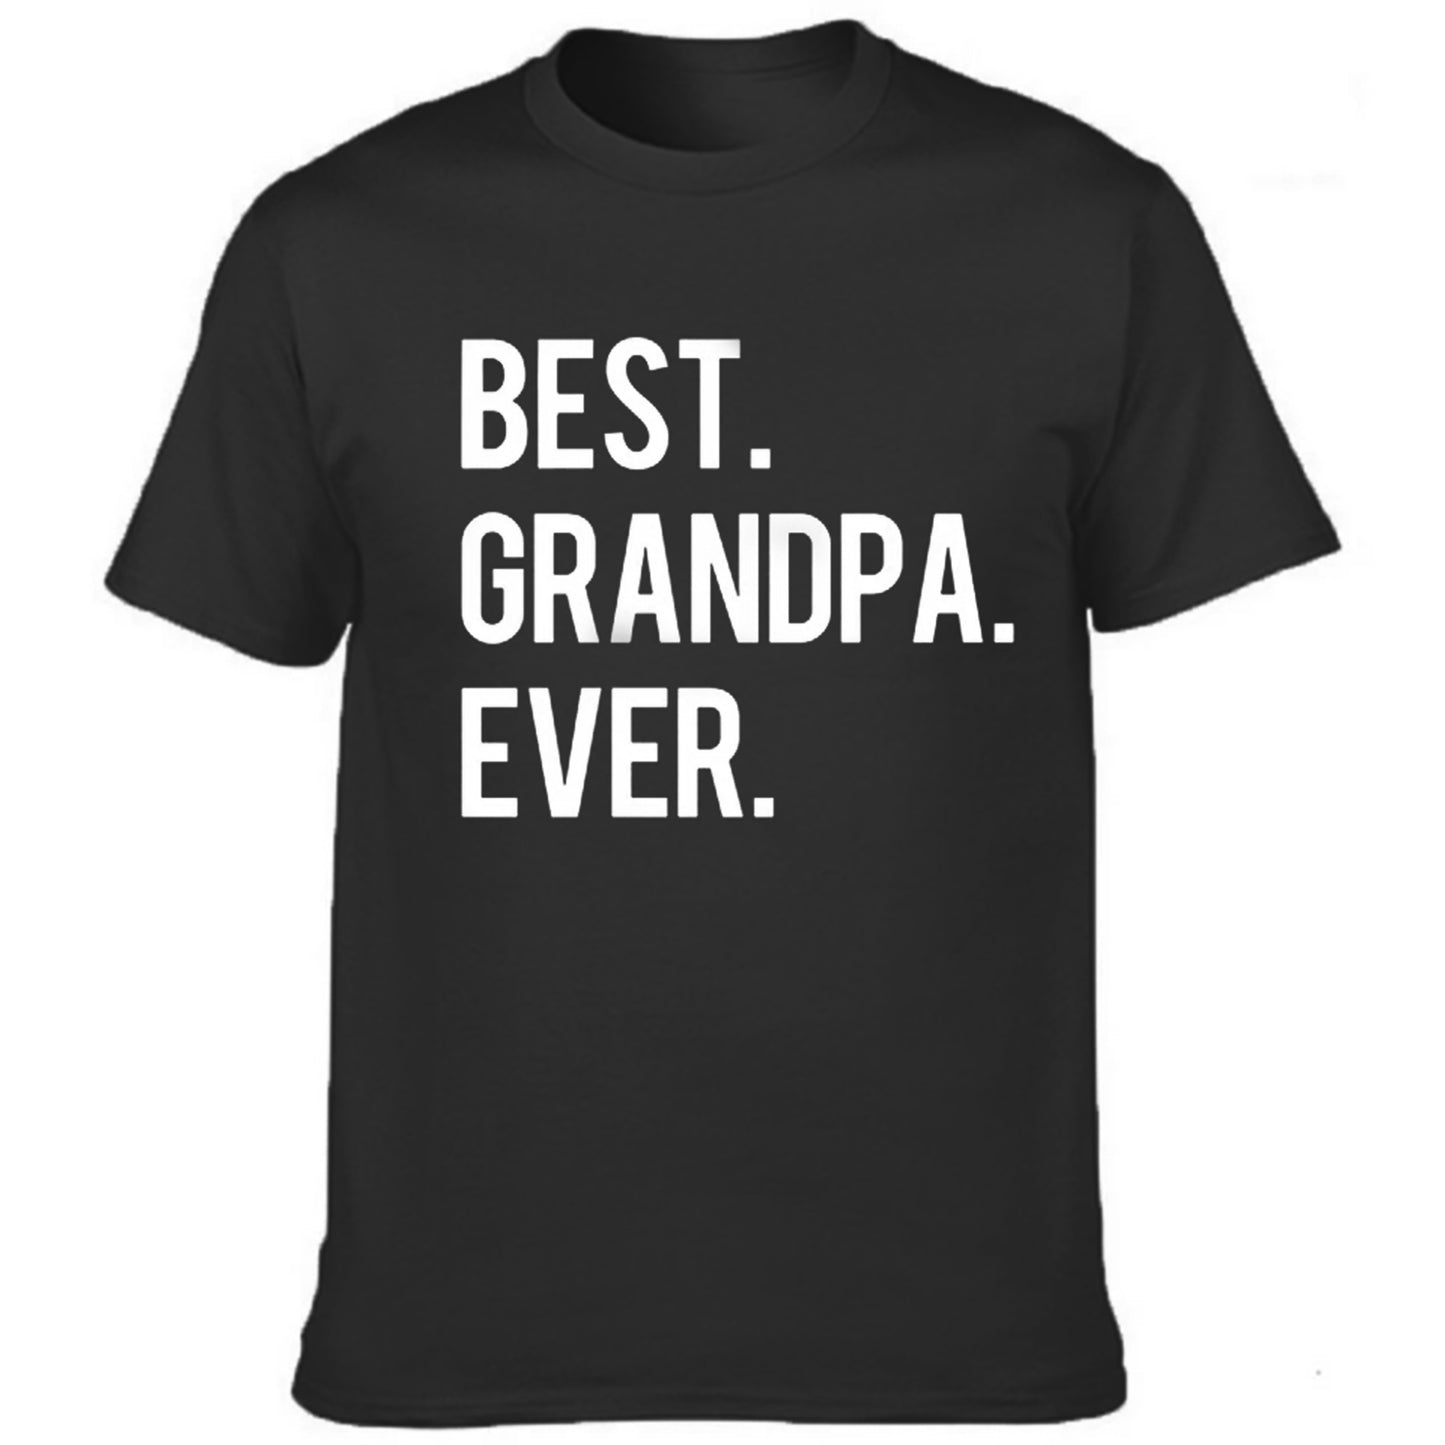 Best Grandfather t shirts for men- Black